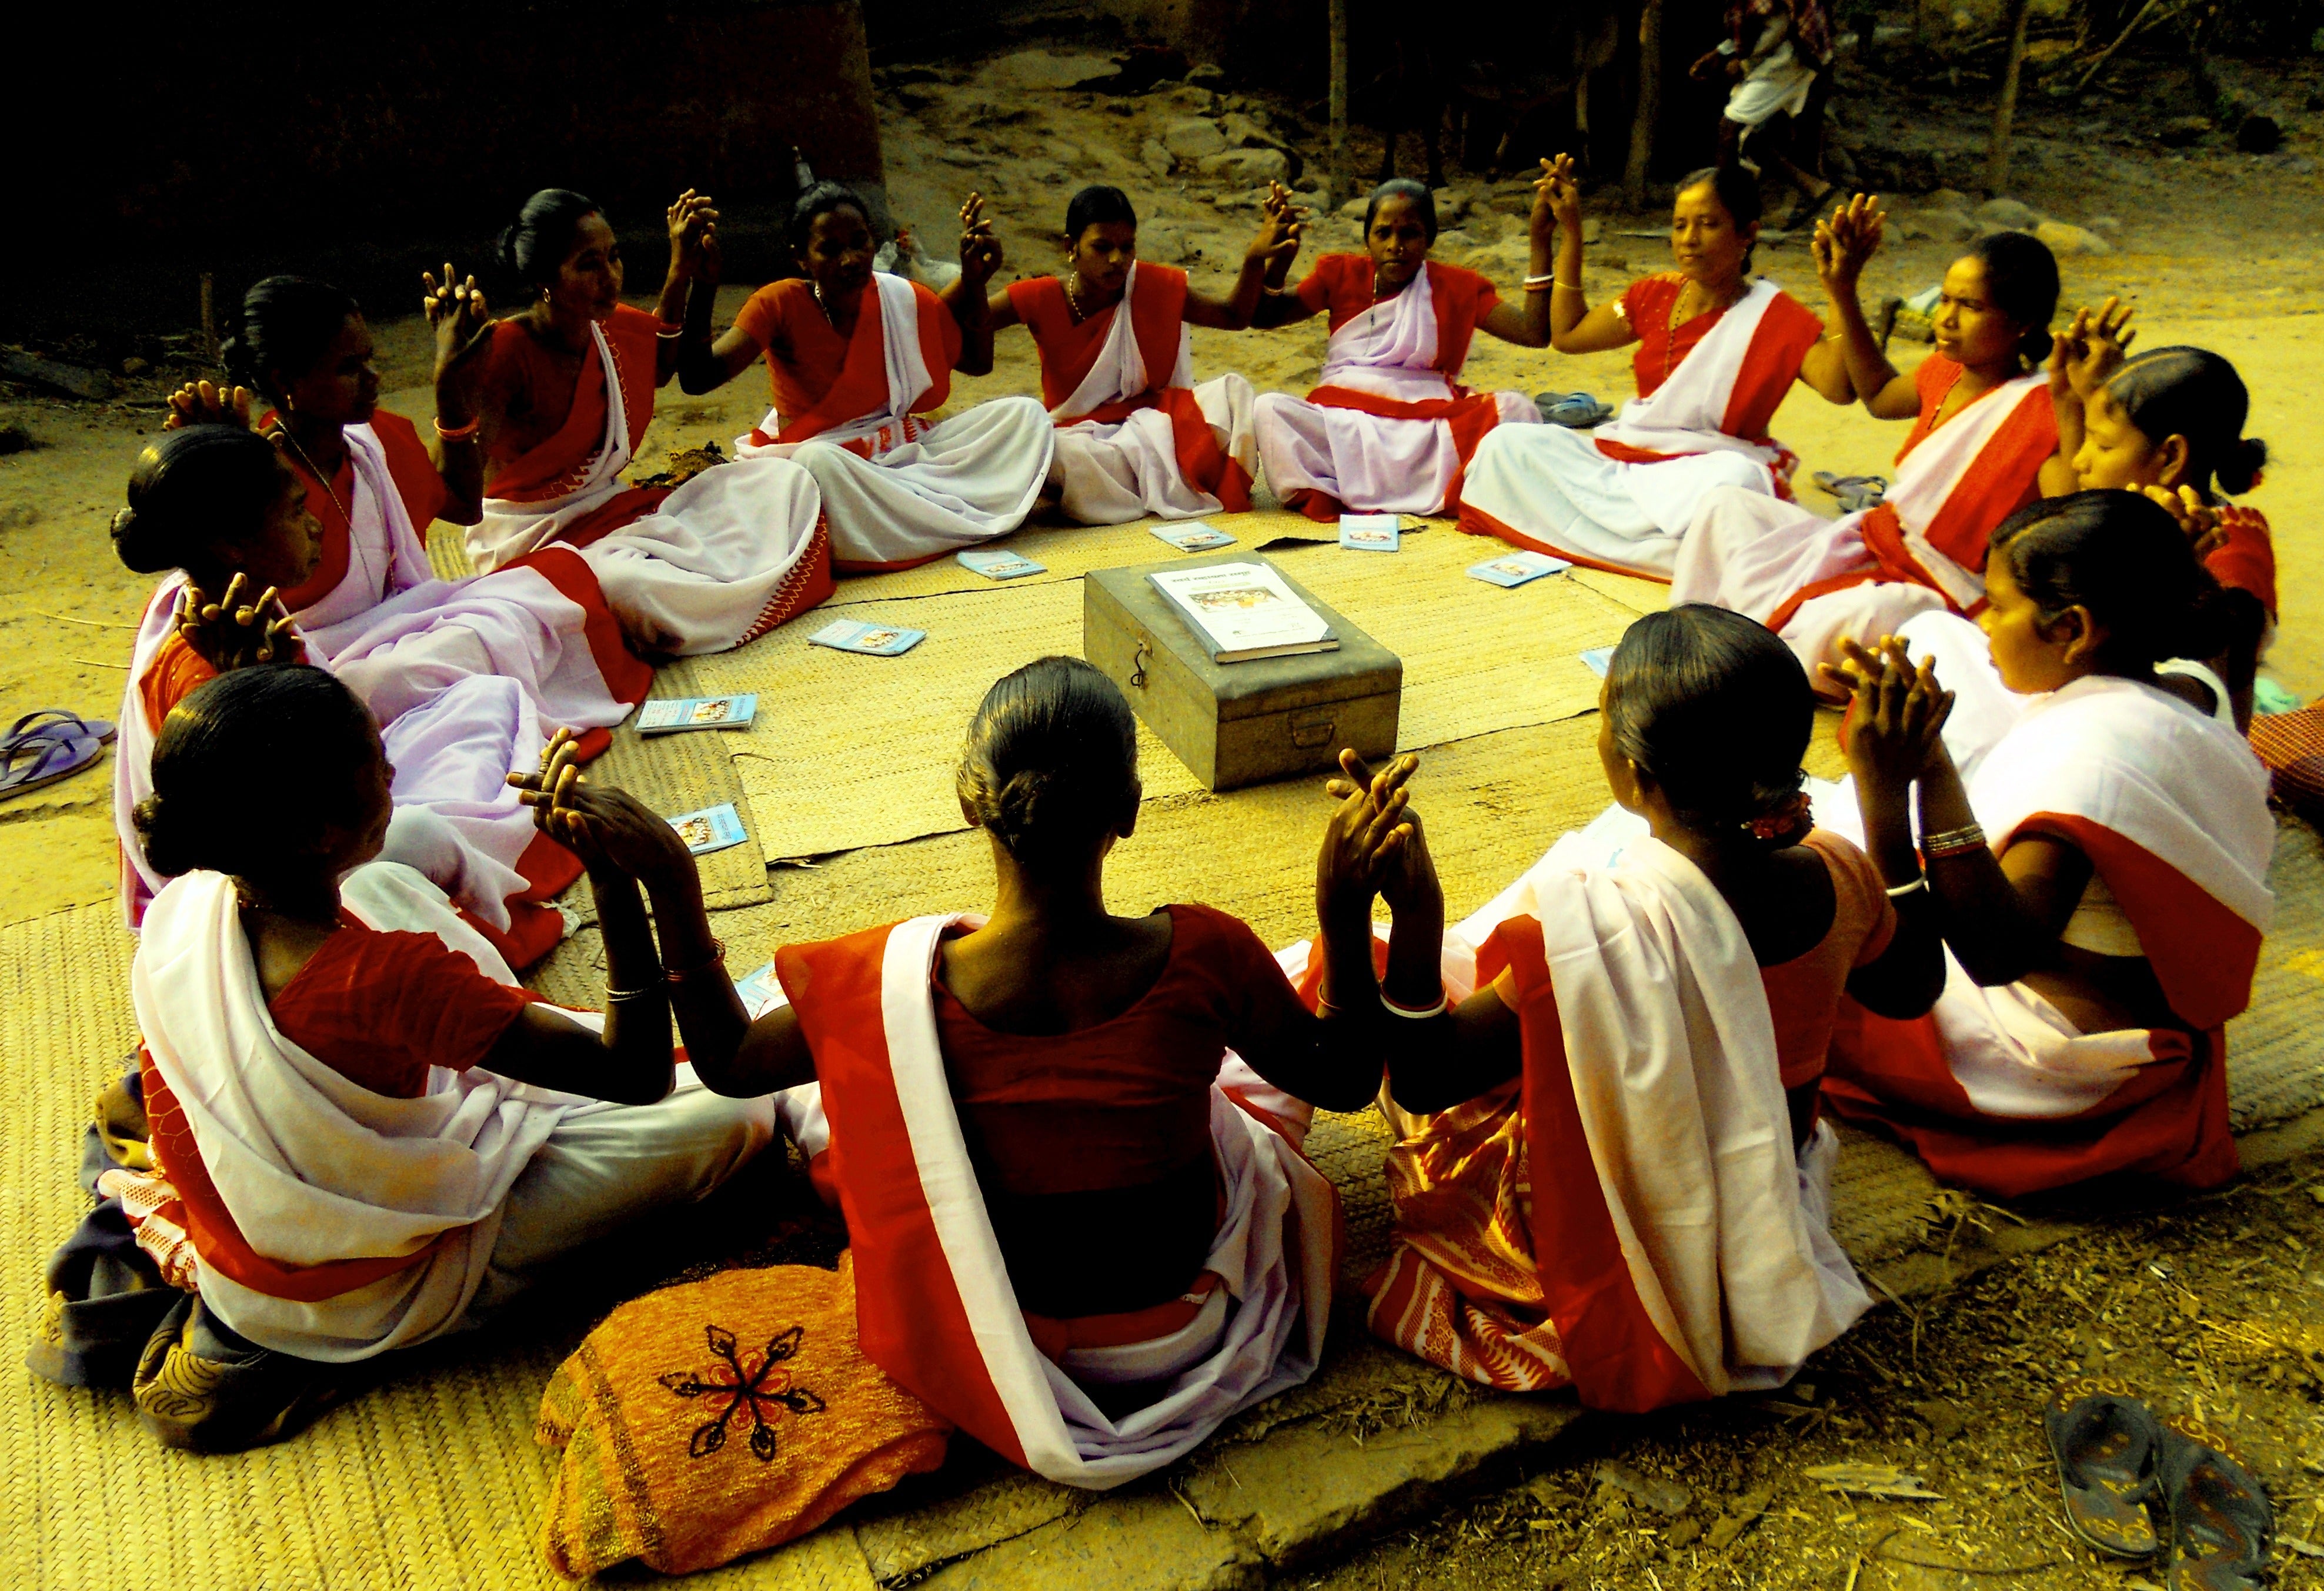 Women hold hands in a circle, India